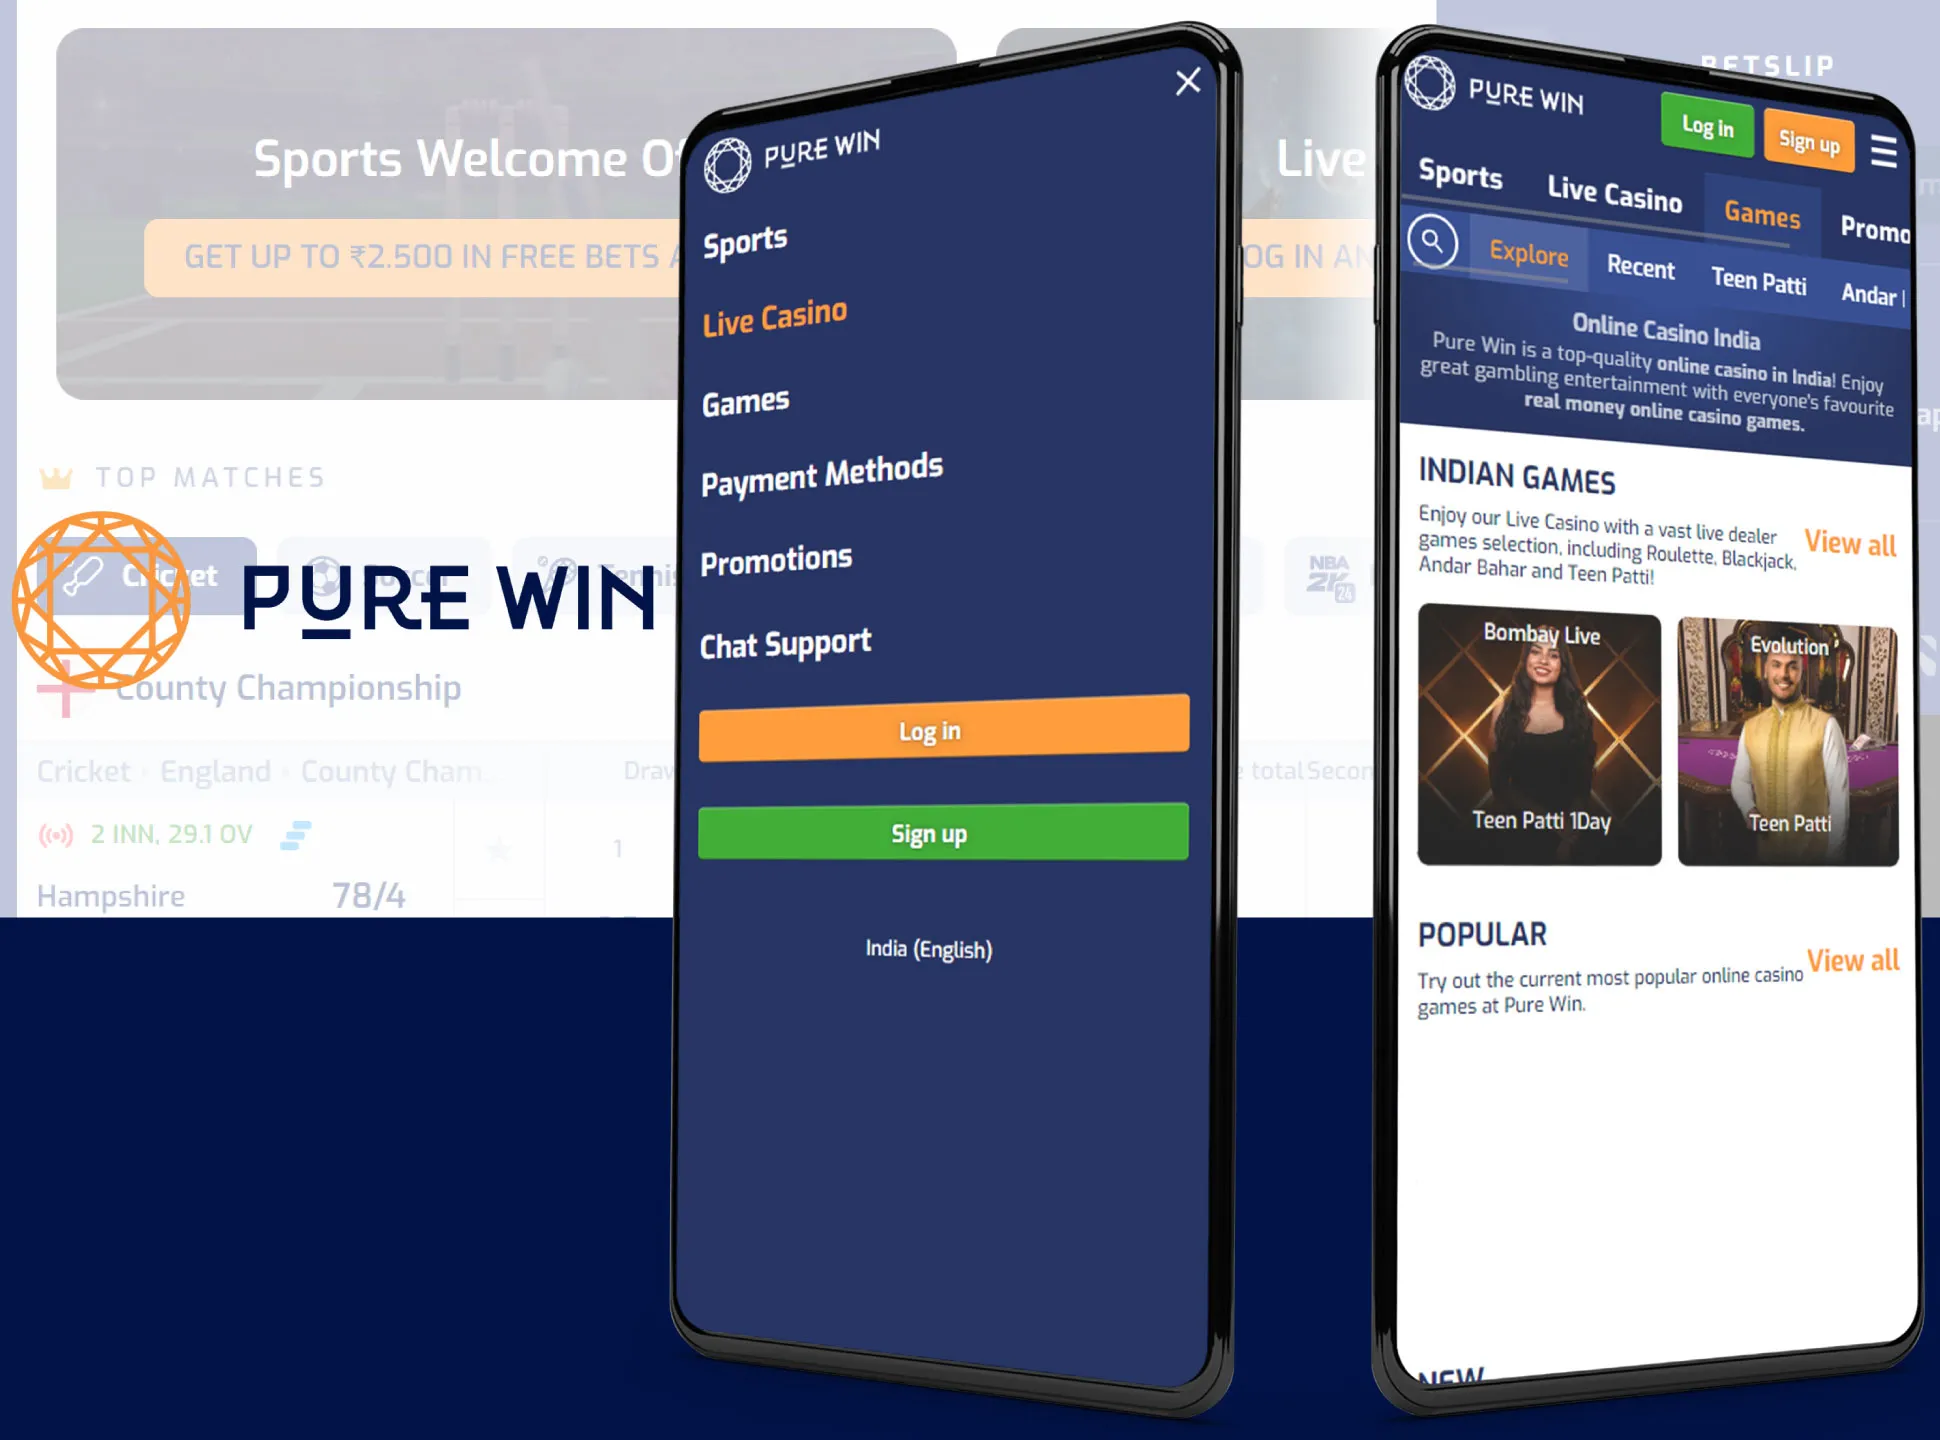 Pure Win has various features that make the betting easier and faster.